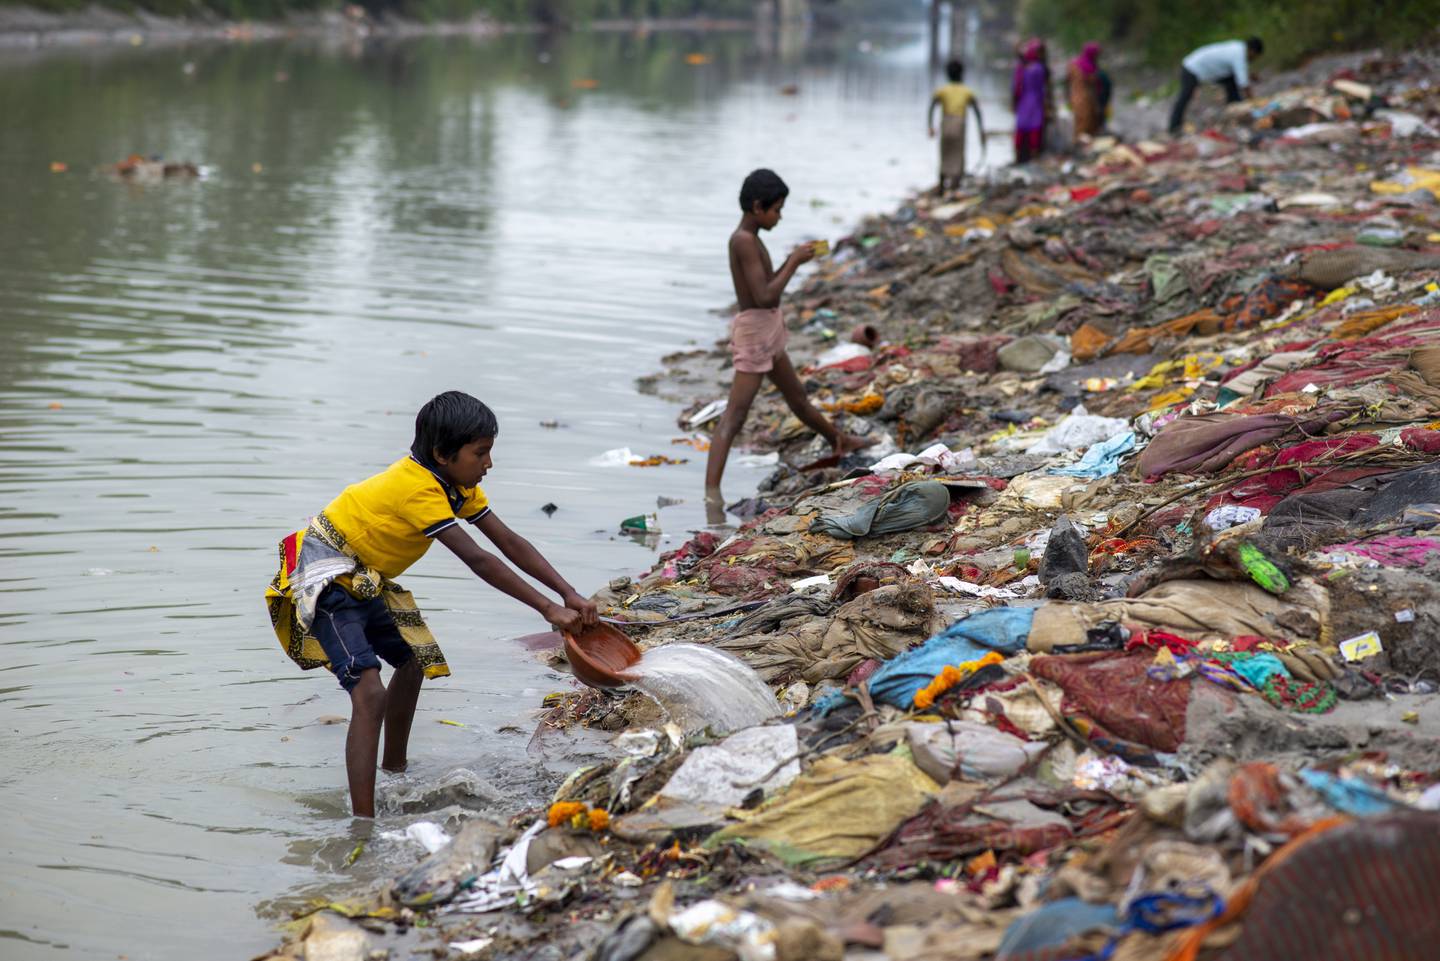 A boy rinsing salvaged waste on the banks of the Ganges Canal at Muradnagar in Uttar Pradesh state. The canal links the Ganges and Yamuna rivers and is used mainly for irrigation. Getty Images